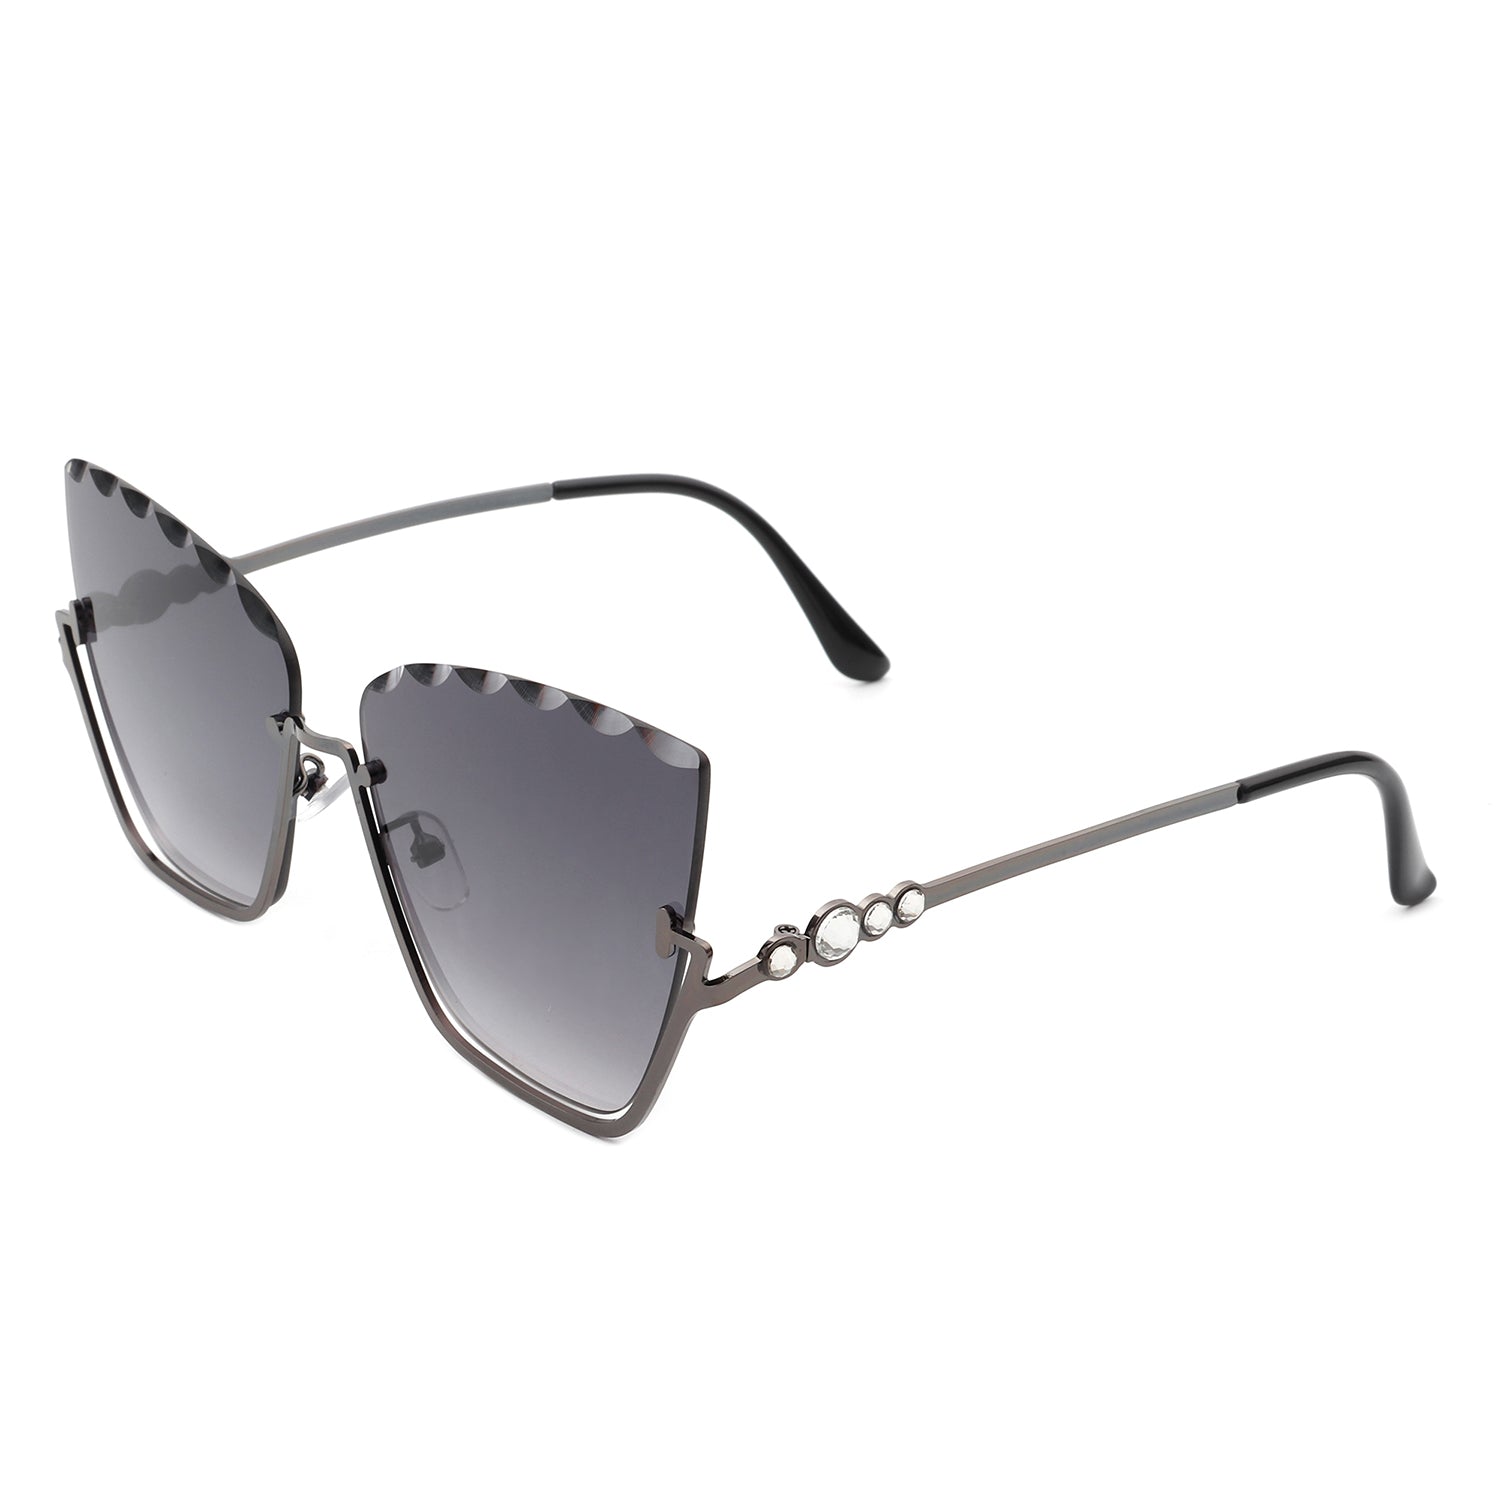 Starfire - Half Frame Square Irregular Tinted Fashion Cat Eye Sunglasses - KME means the very best